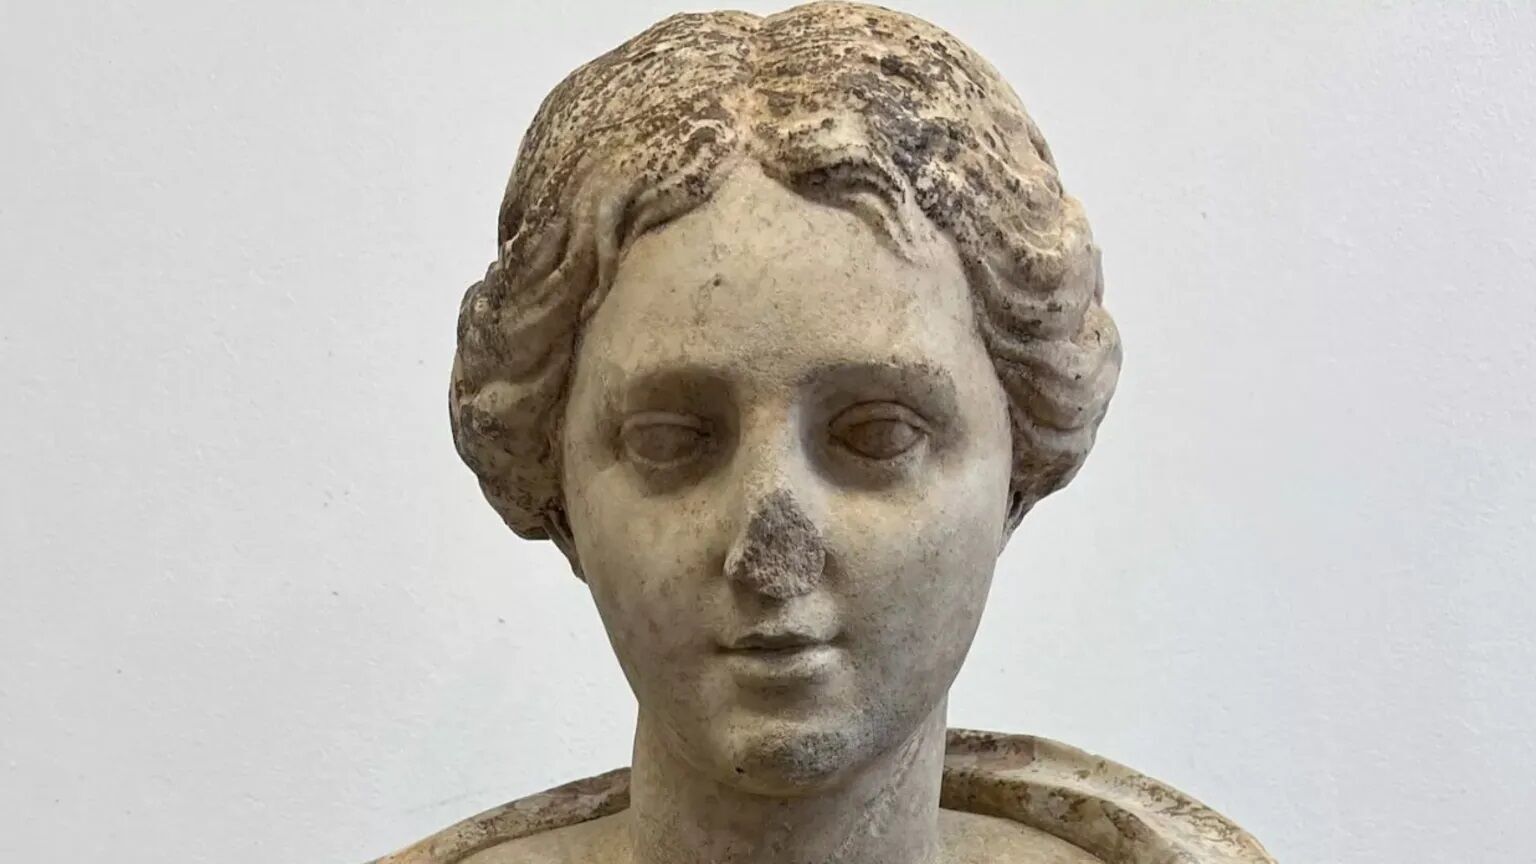 Archaeologists find noseless head of 'beautiful Roman woman' in Britain (photo)